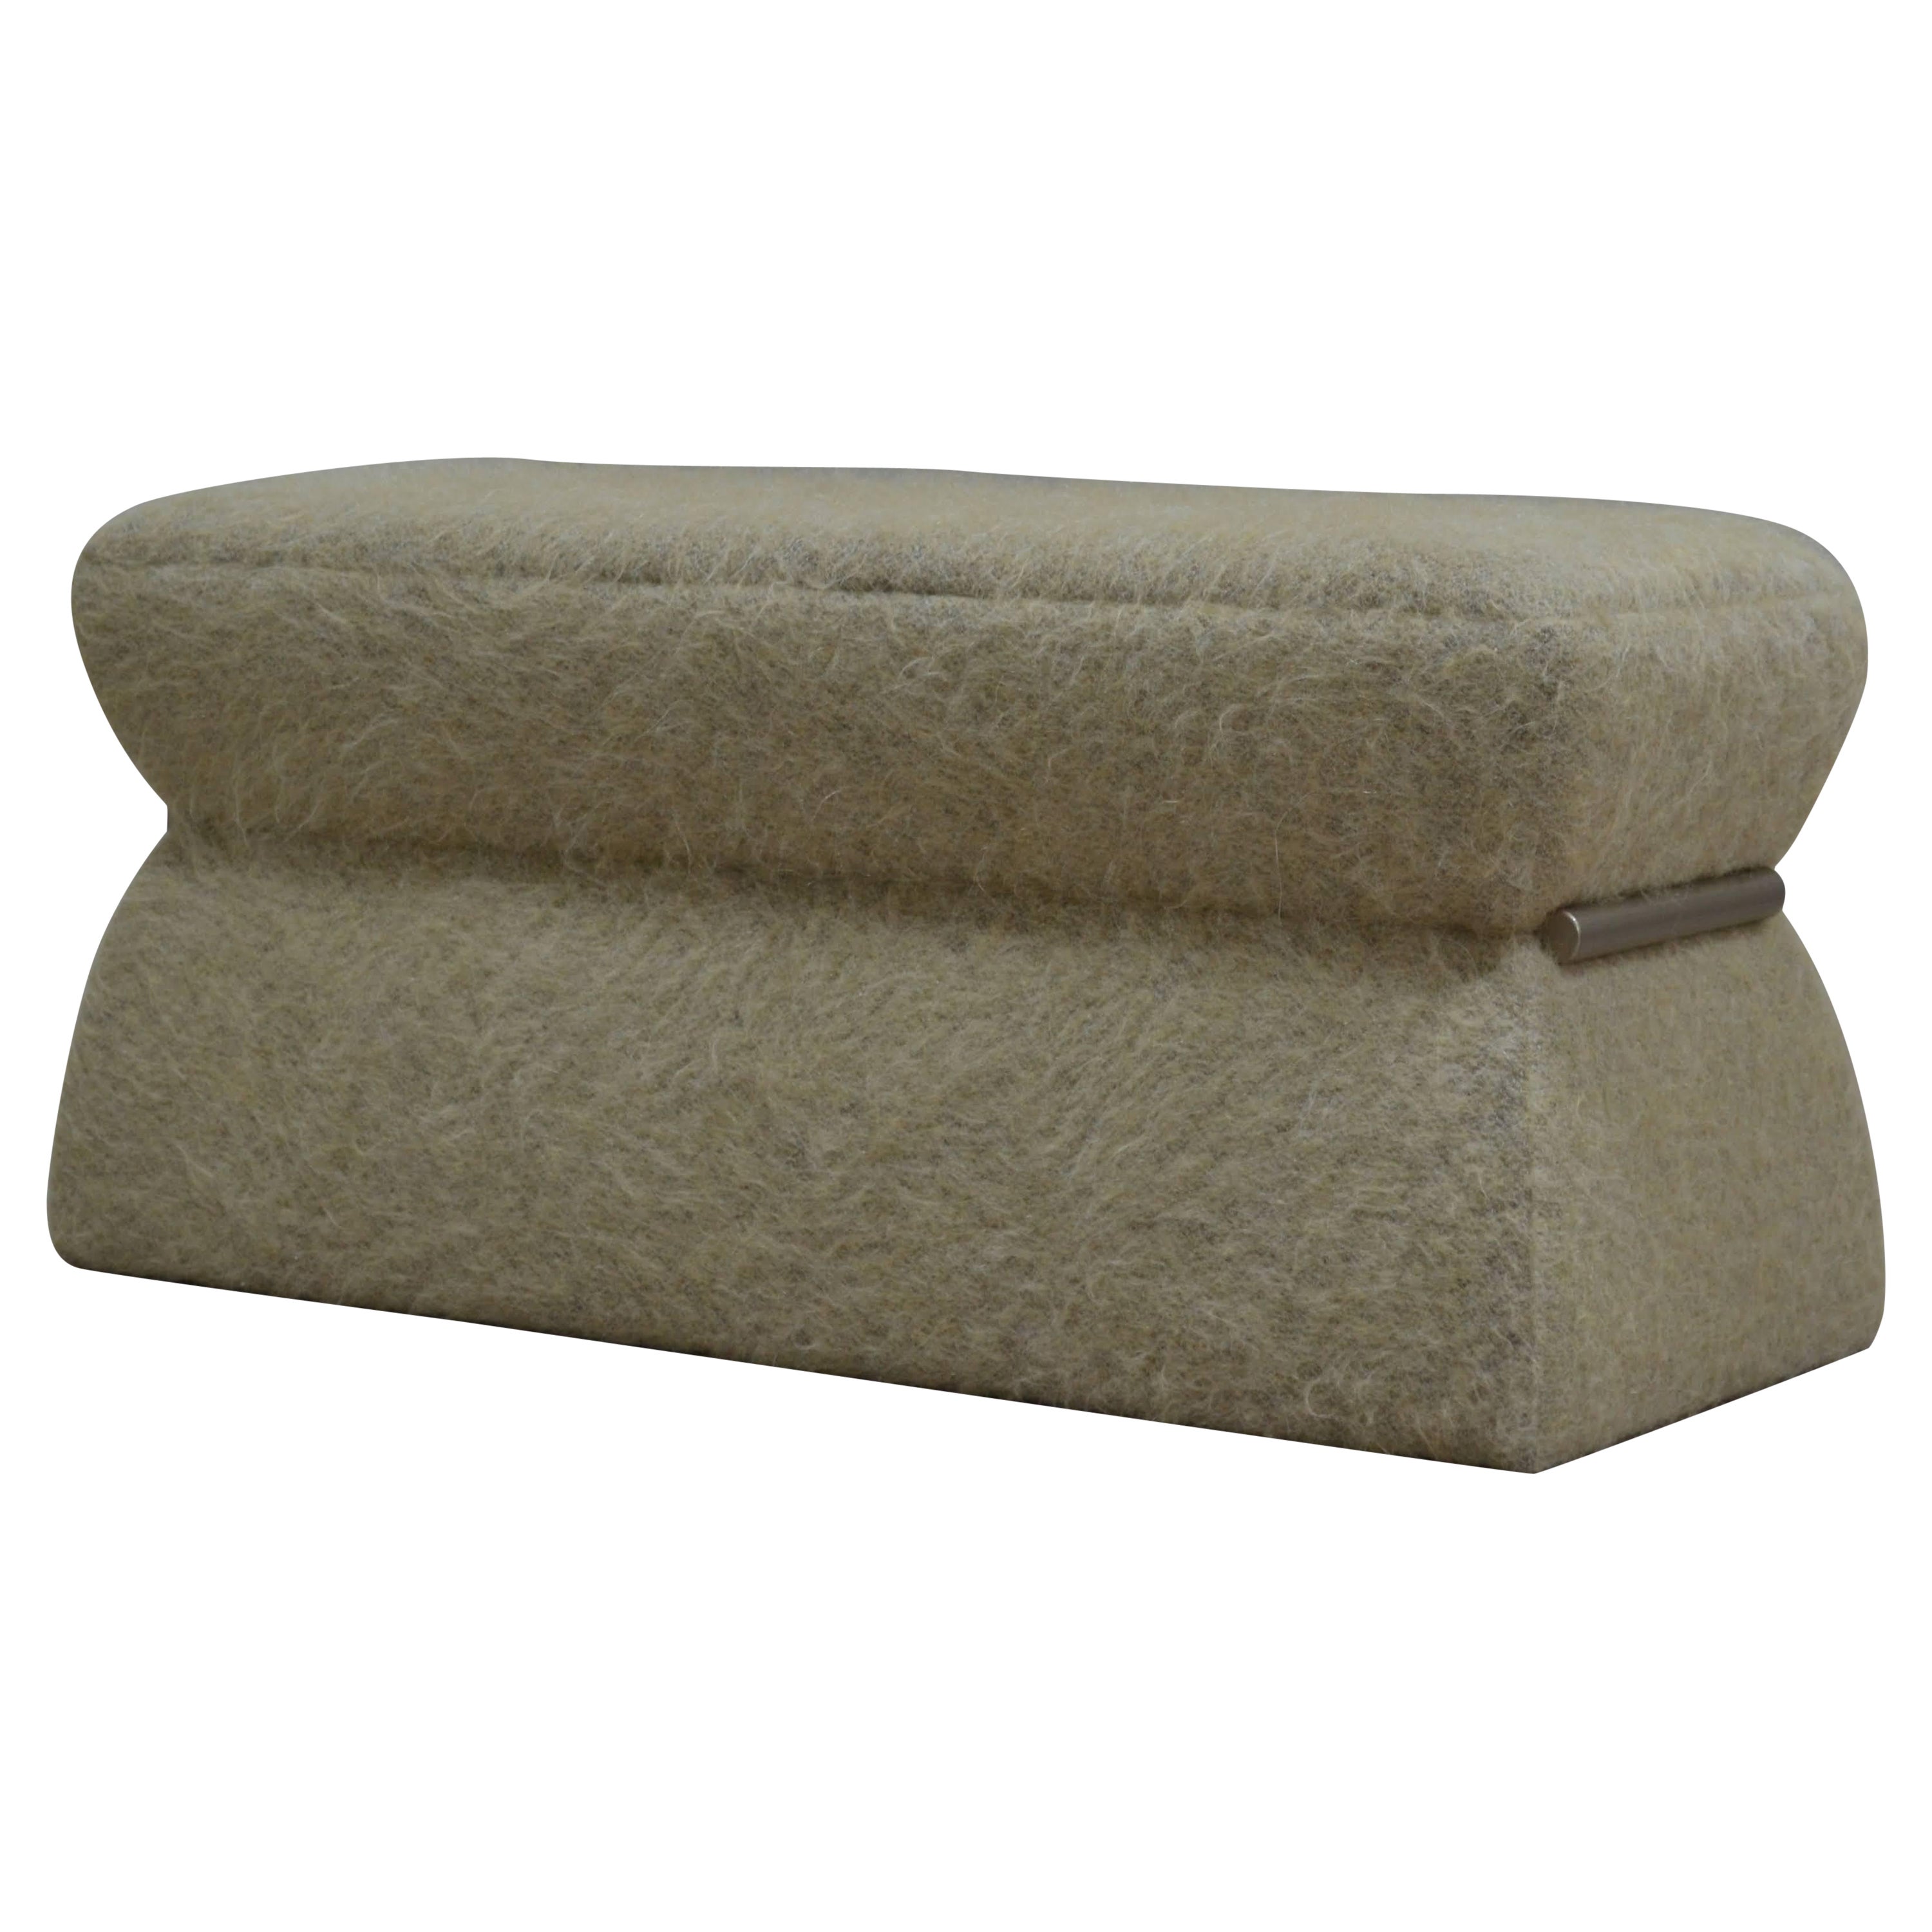 'Cusi' Bench in Pierre Frey Quinoa Mohair For Sale